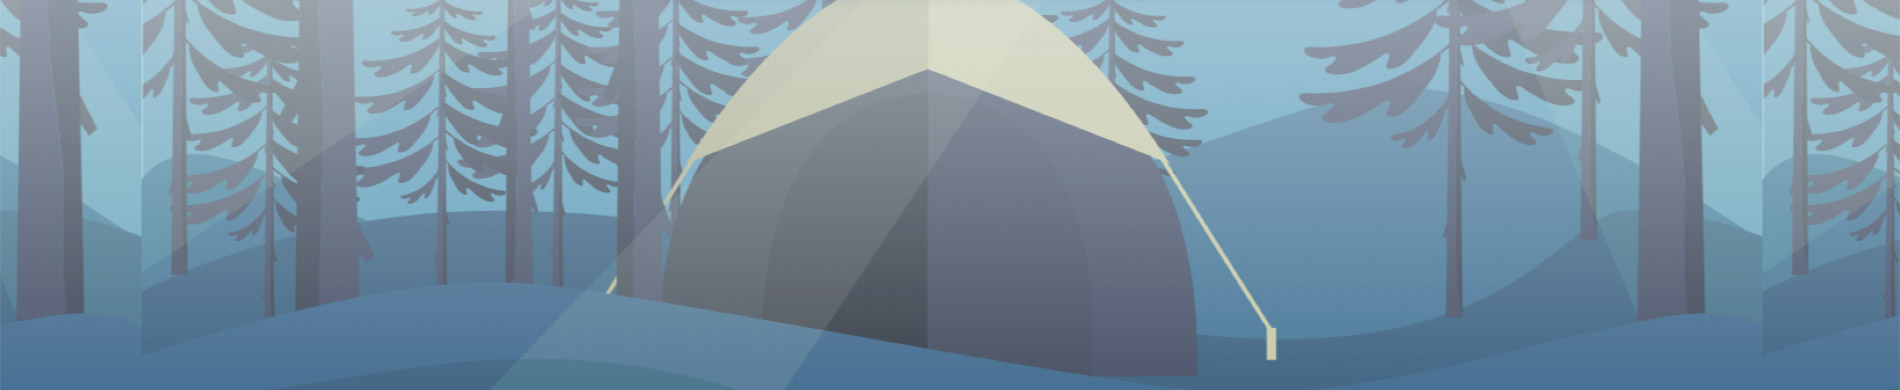 Abstract image of a tent in the trees.  Image courtesy of NaNoWriMo.